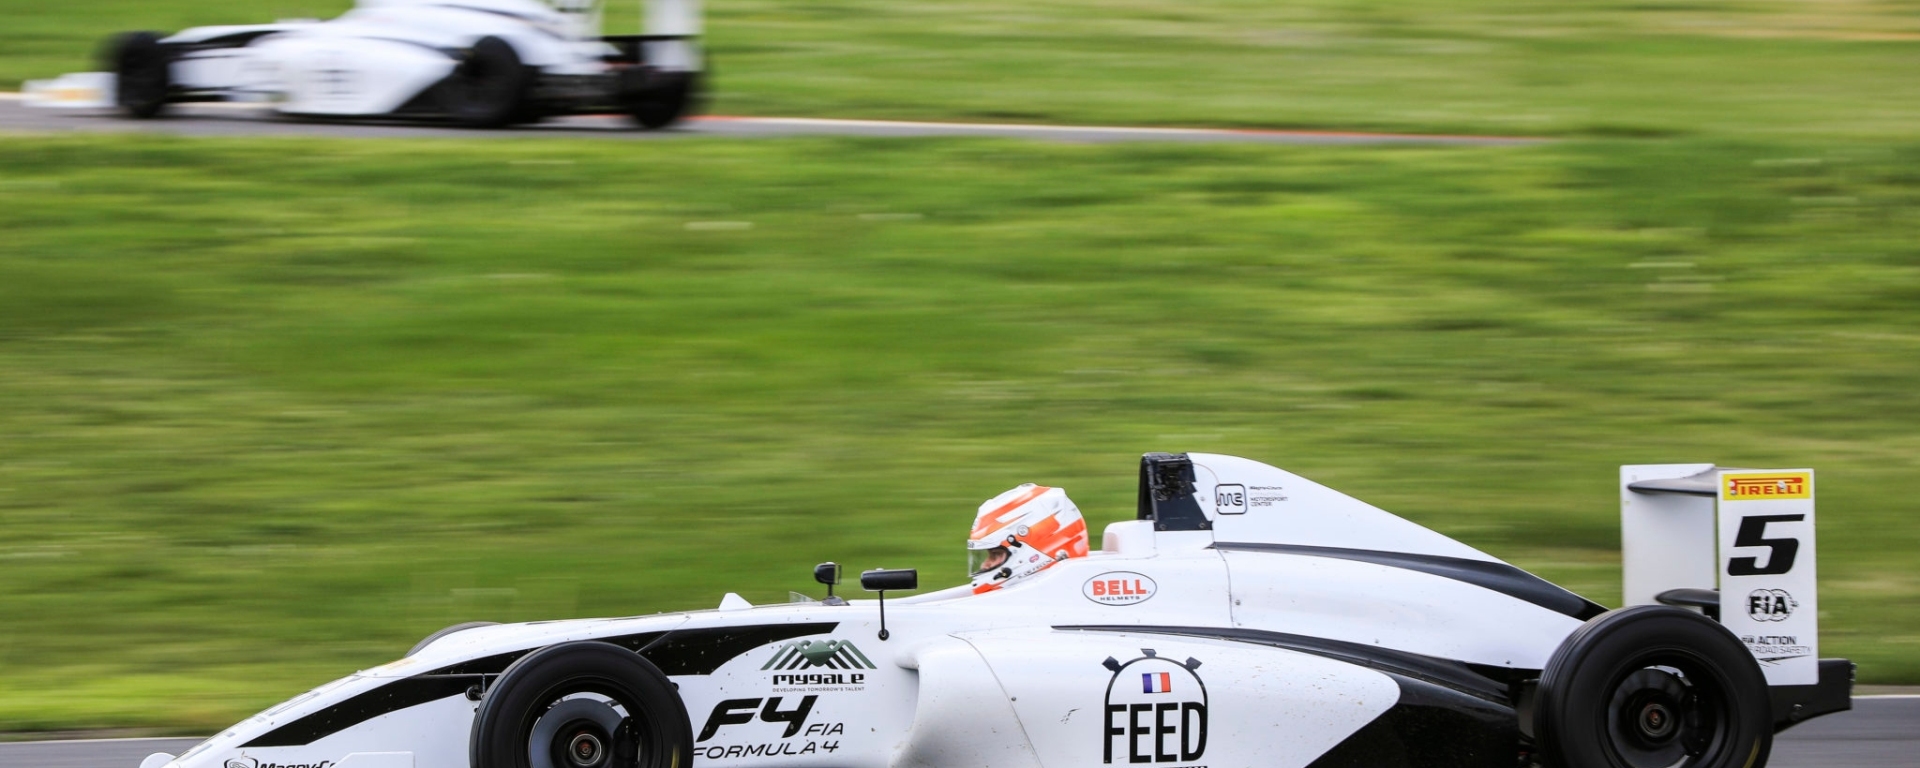 White and black formula 4 car driving to the left of the camera with another similar car behind it on a different section of the track.